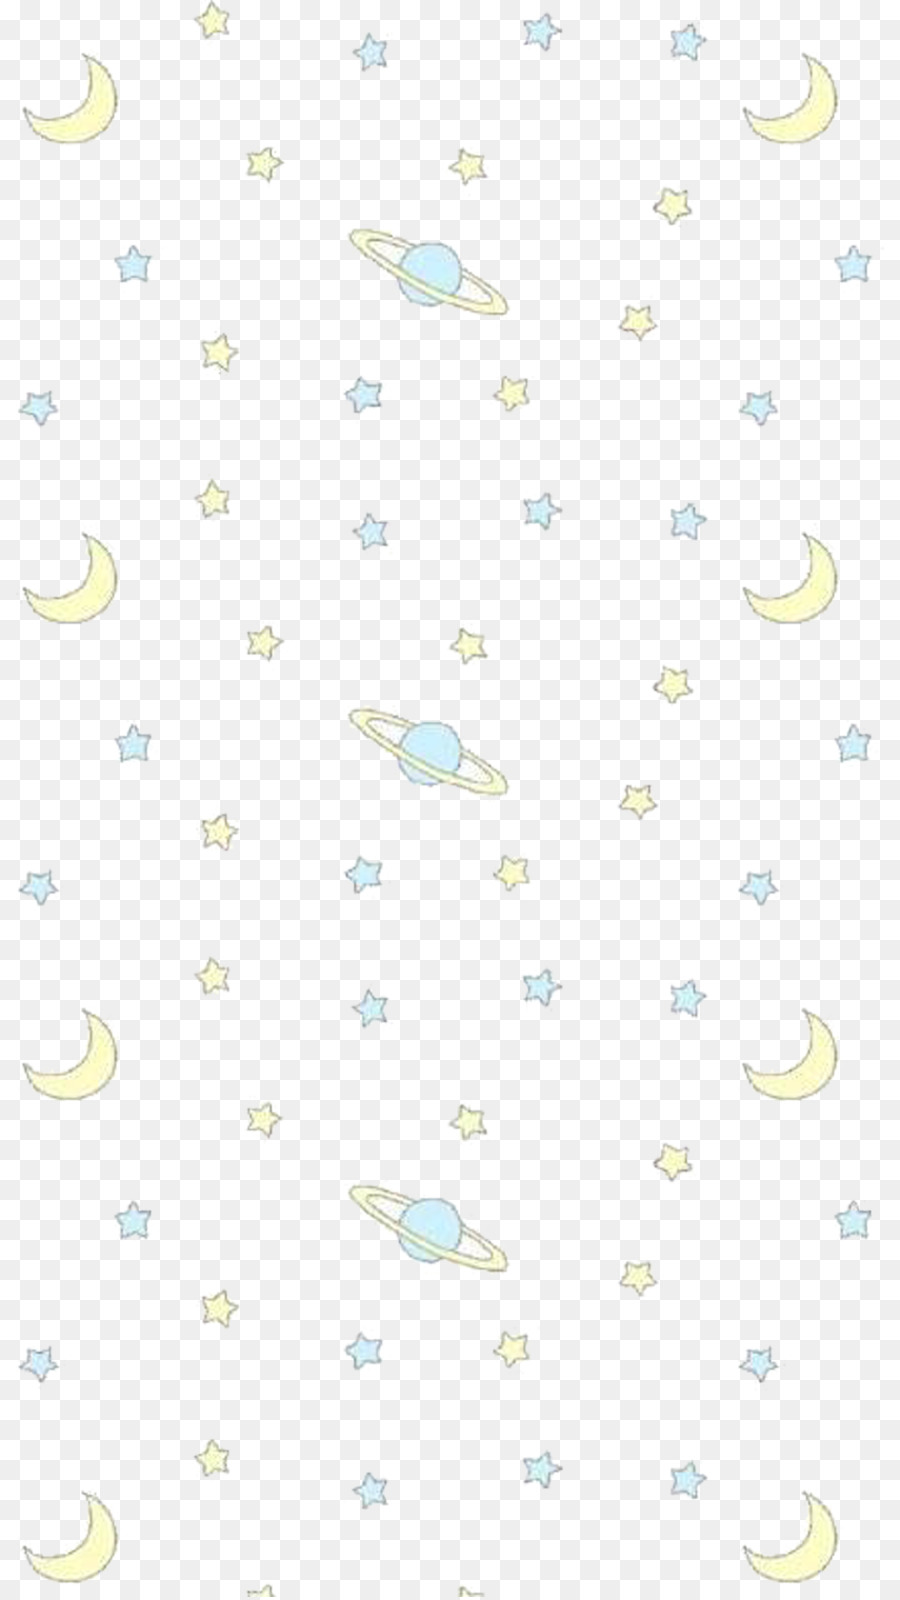 Sky Olbers paradox Pattern - Star background png download - 1701*3019 - Free Transparent Sky png Download.